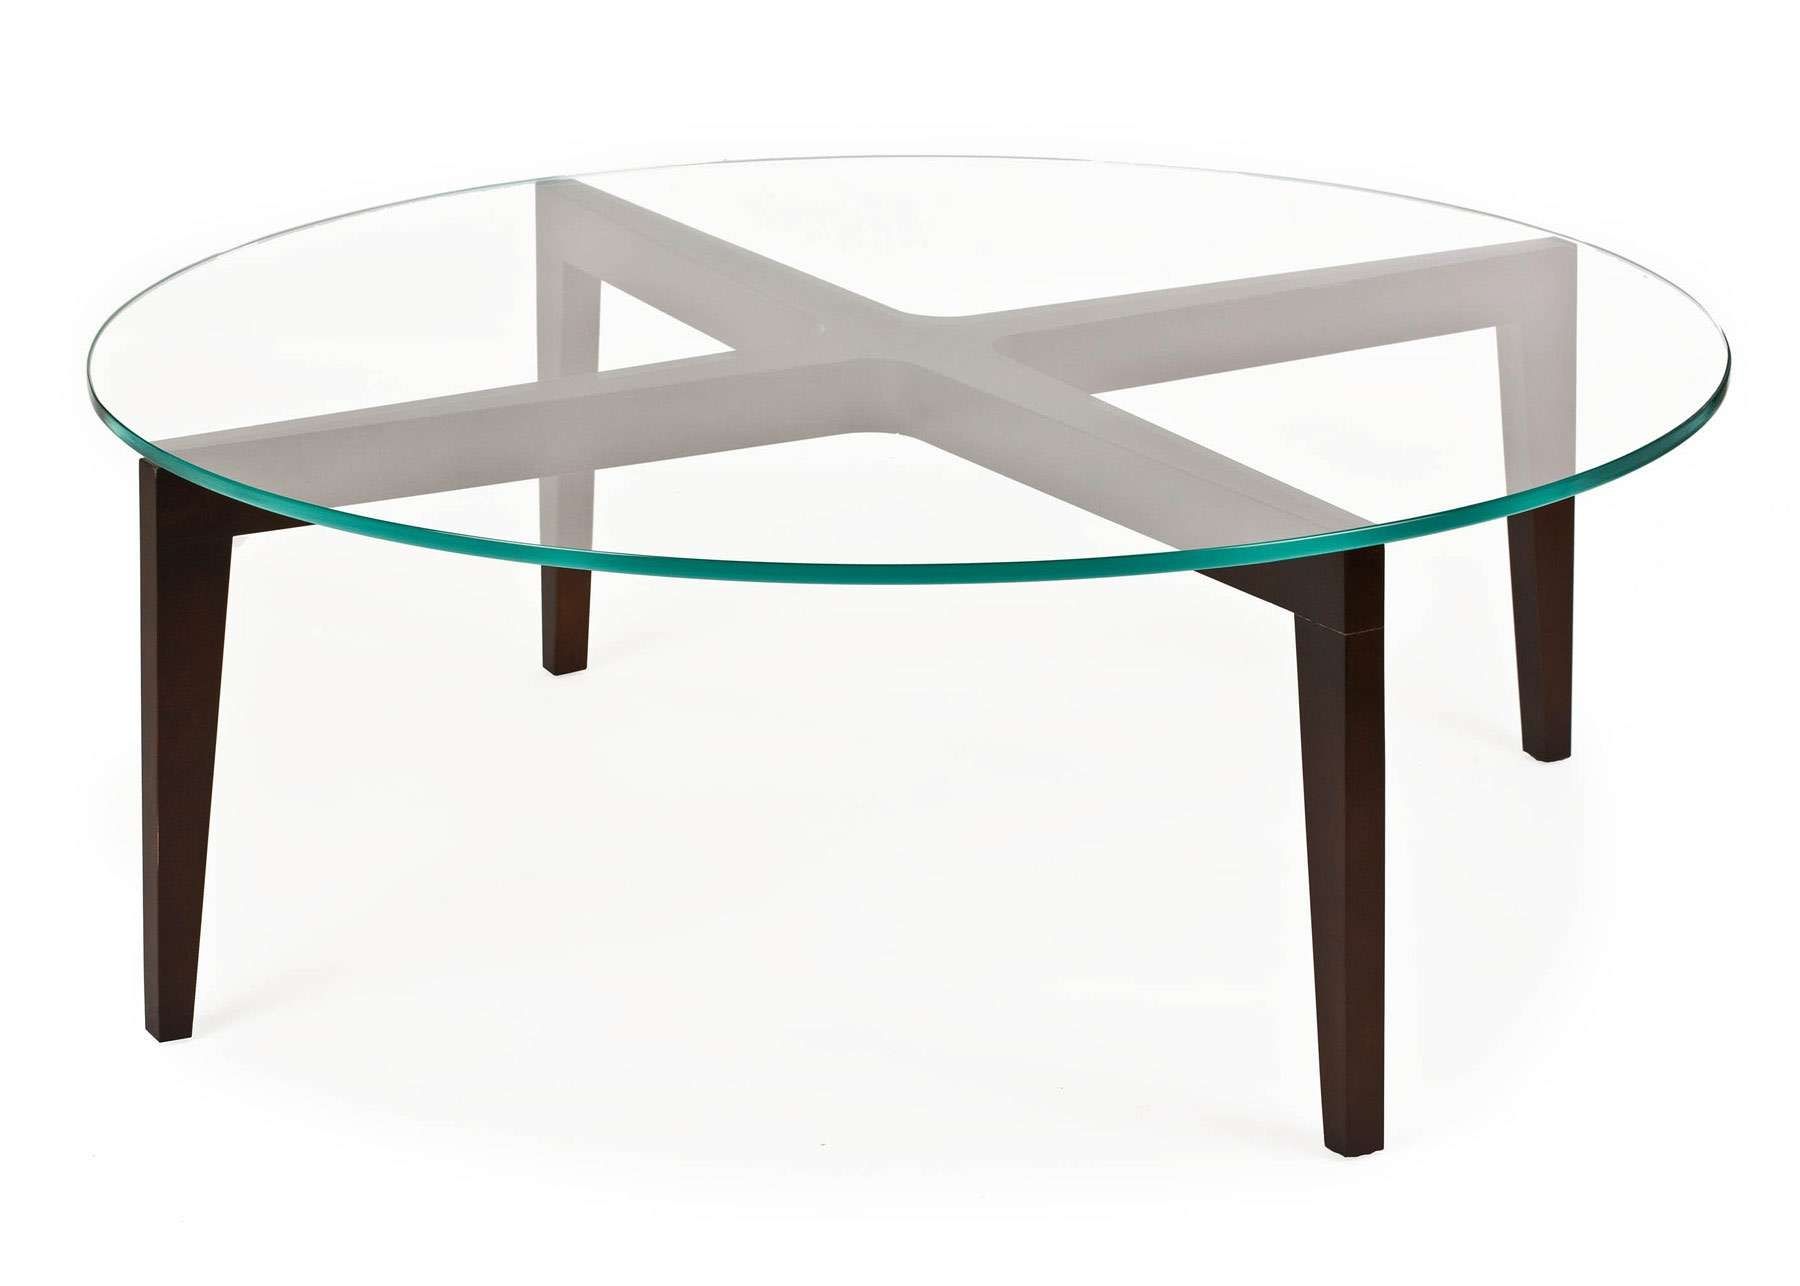 Famous Round Glass And Wood Coffee Tables For Coffee Table: Unique Round Wood And Glass Coffee Table Design Low (View 1 of 20)